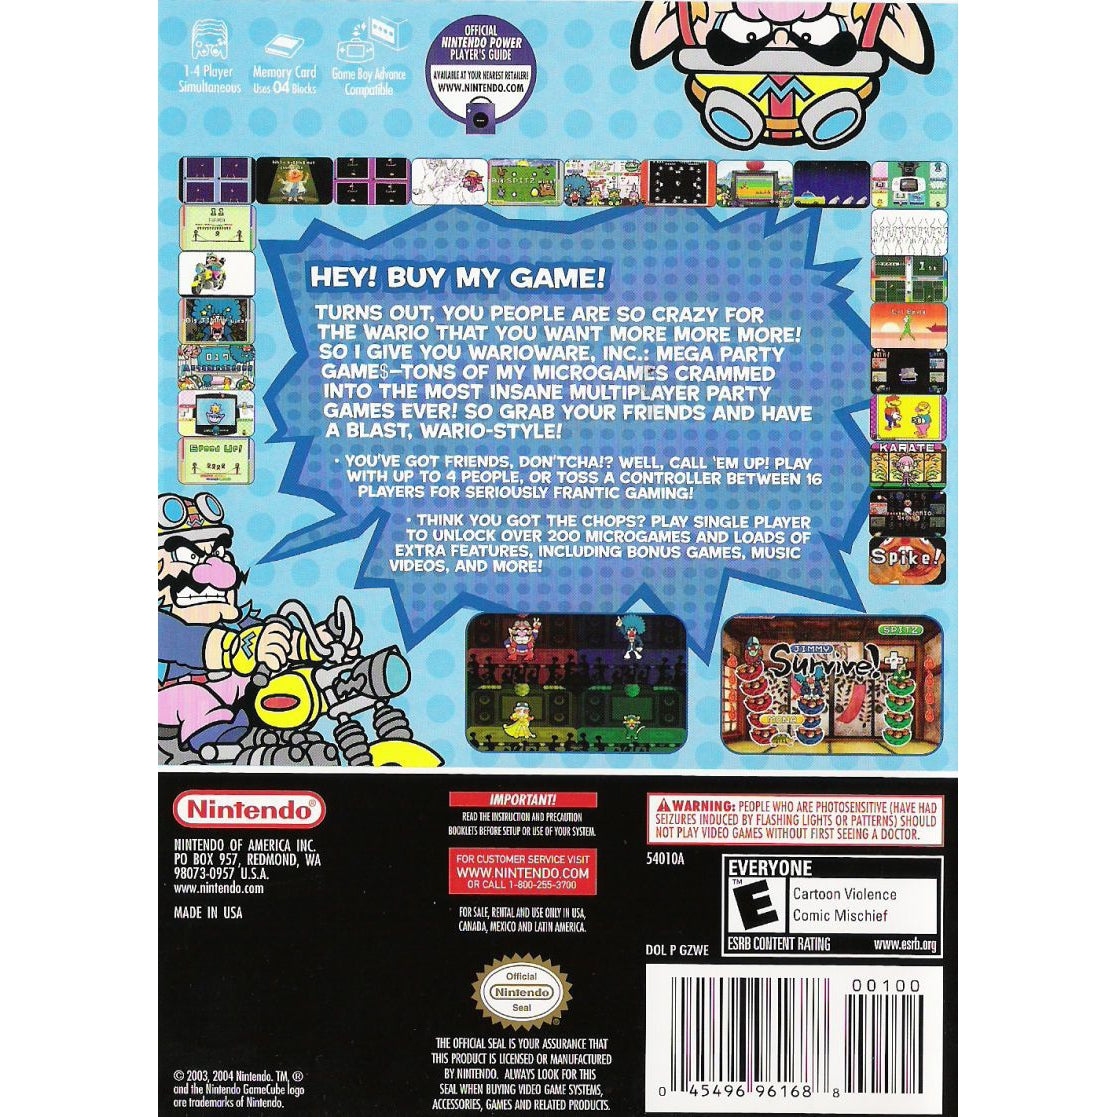 WarioWare, Inc.: Mega Party Game$! - GameCube Game Complete - YourGamingShop.com - Buy, Sell, Trade Video Games Online. 120 Day Warranty. Satisfaction Guaranteed.